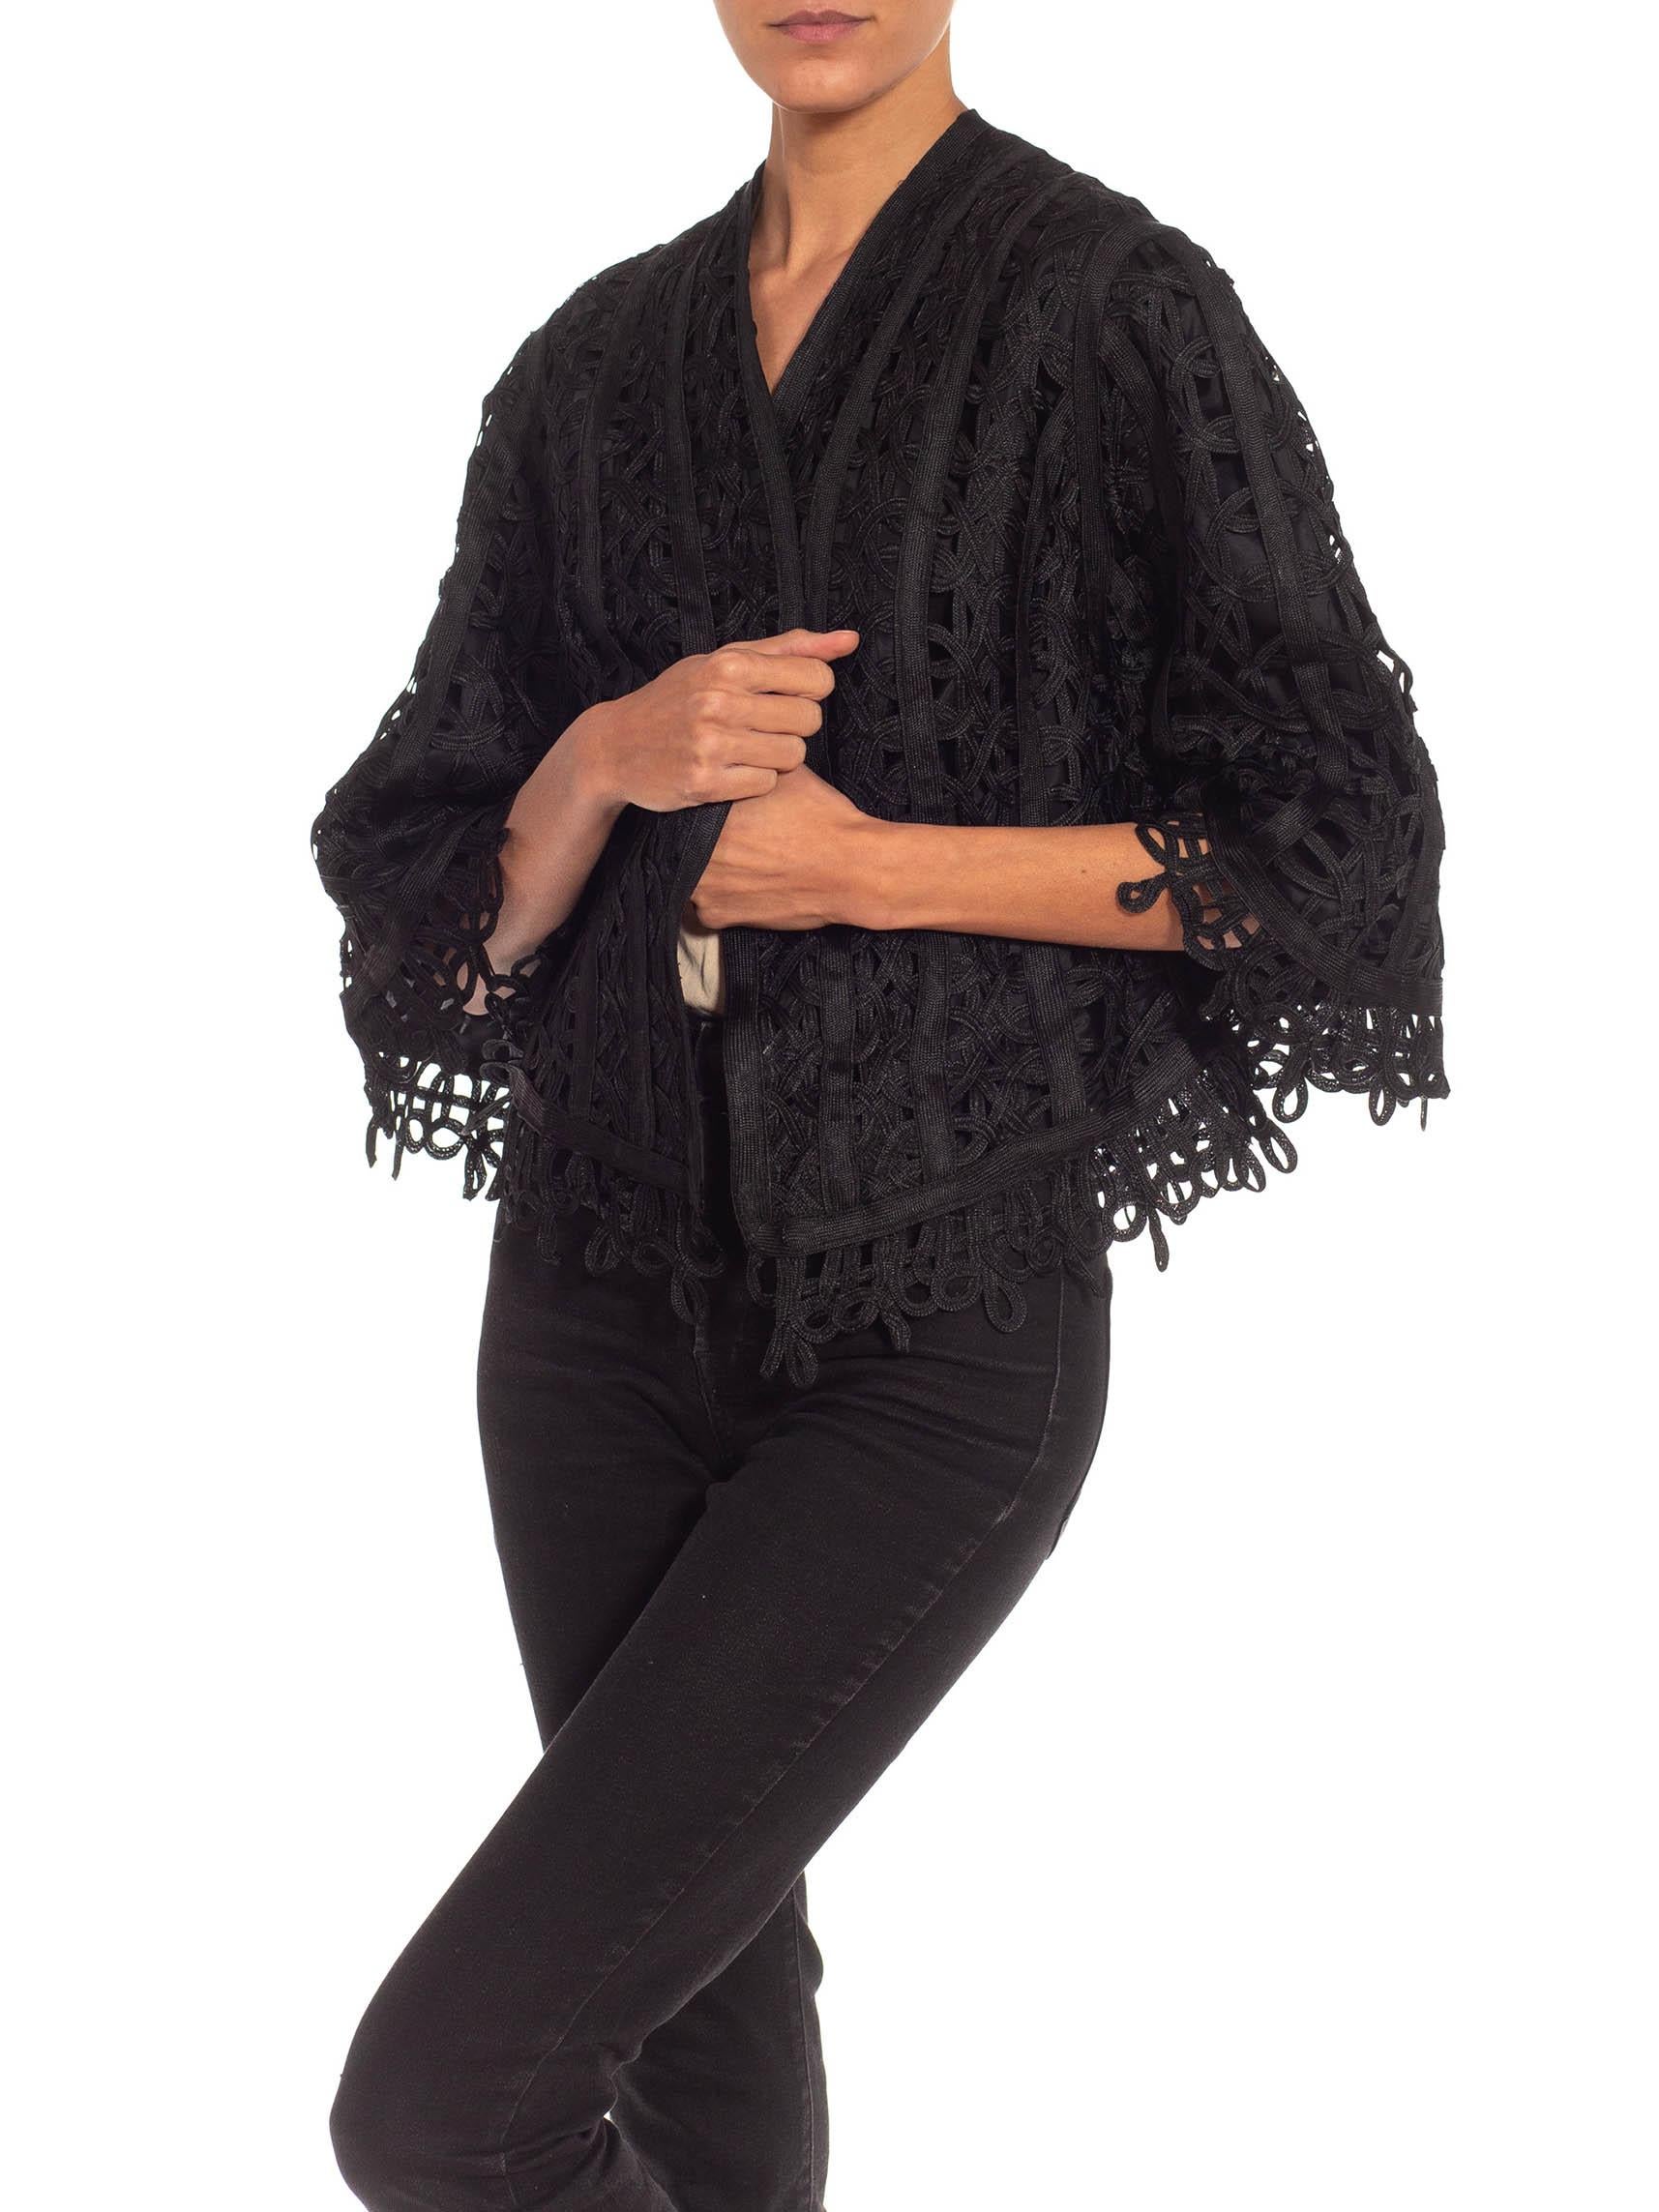 Victorian Black Silk Tape Lace Short Jacket With 3 Quarter Sleeves For Sale 1